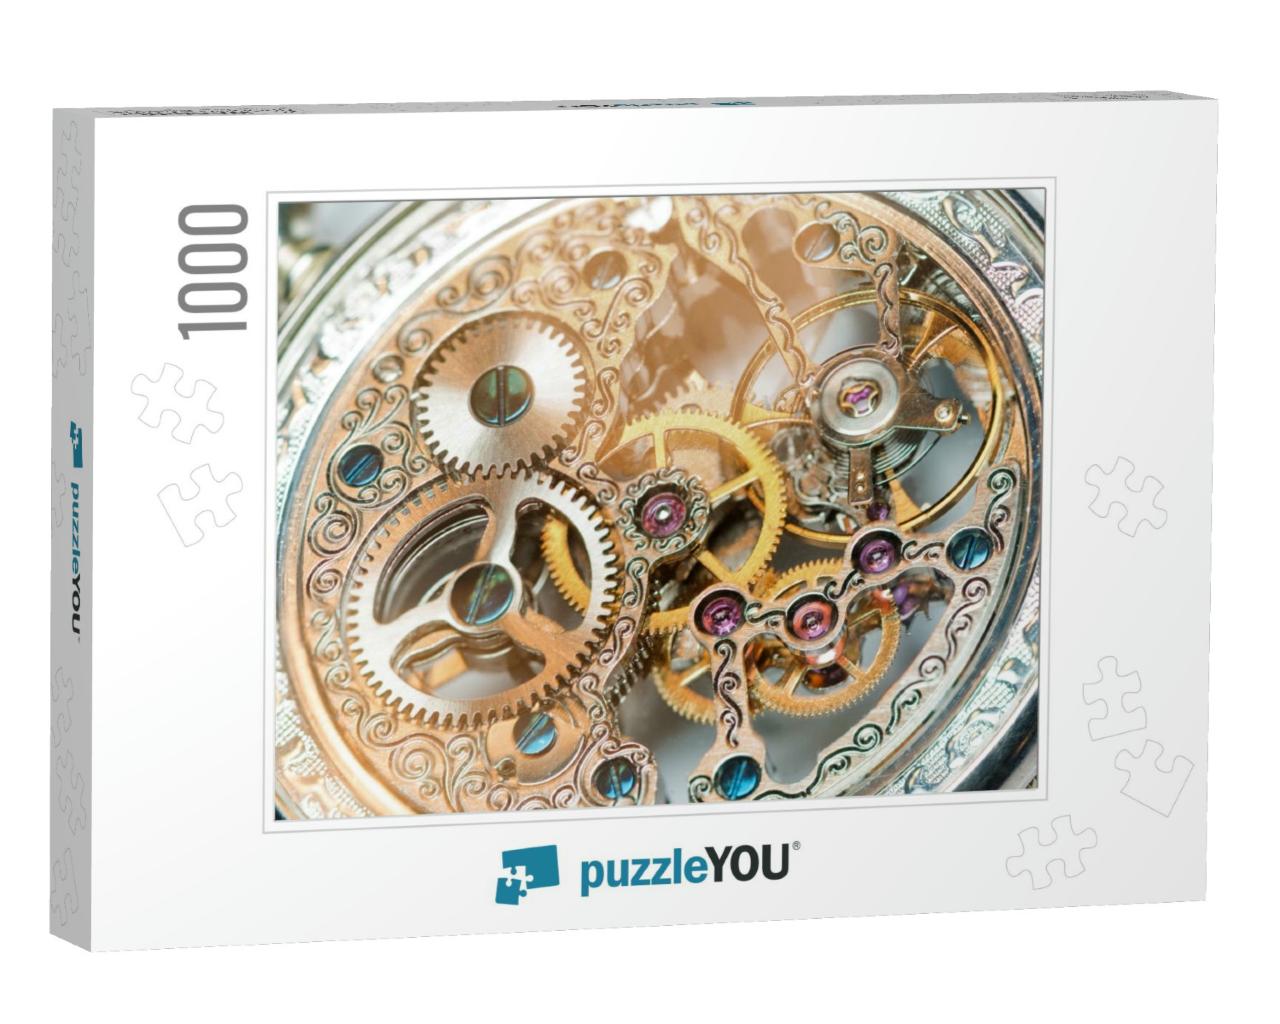 Close View of a Vintage Beautiful Watch Mechanism... Jigsaw Puzzle with 1000 pieces